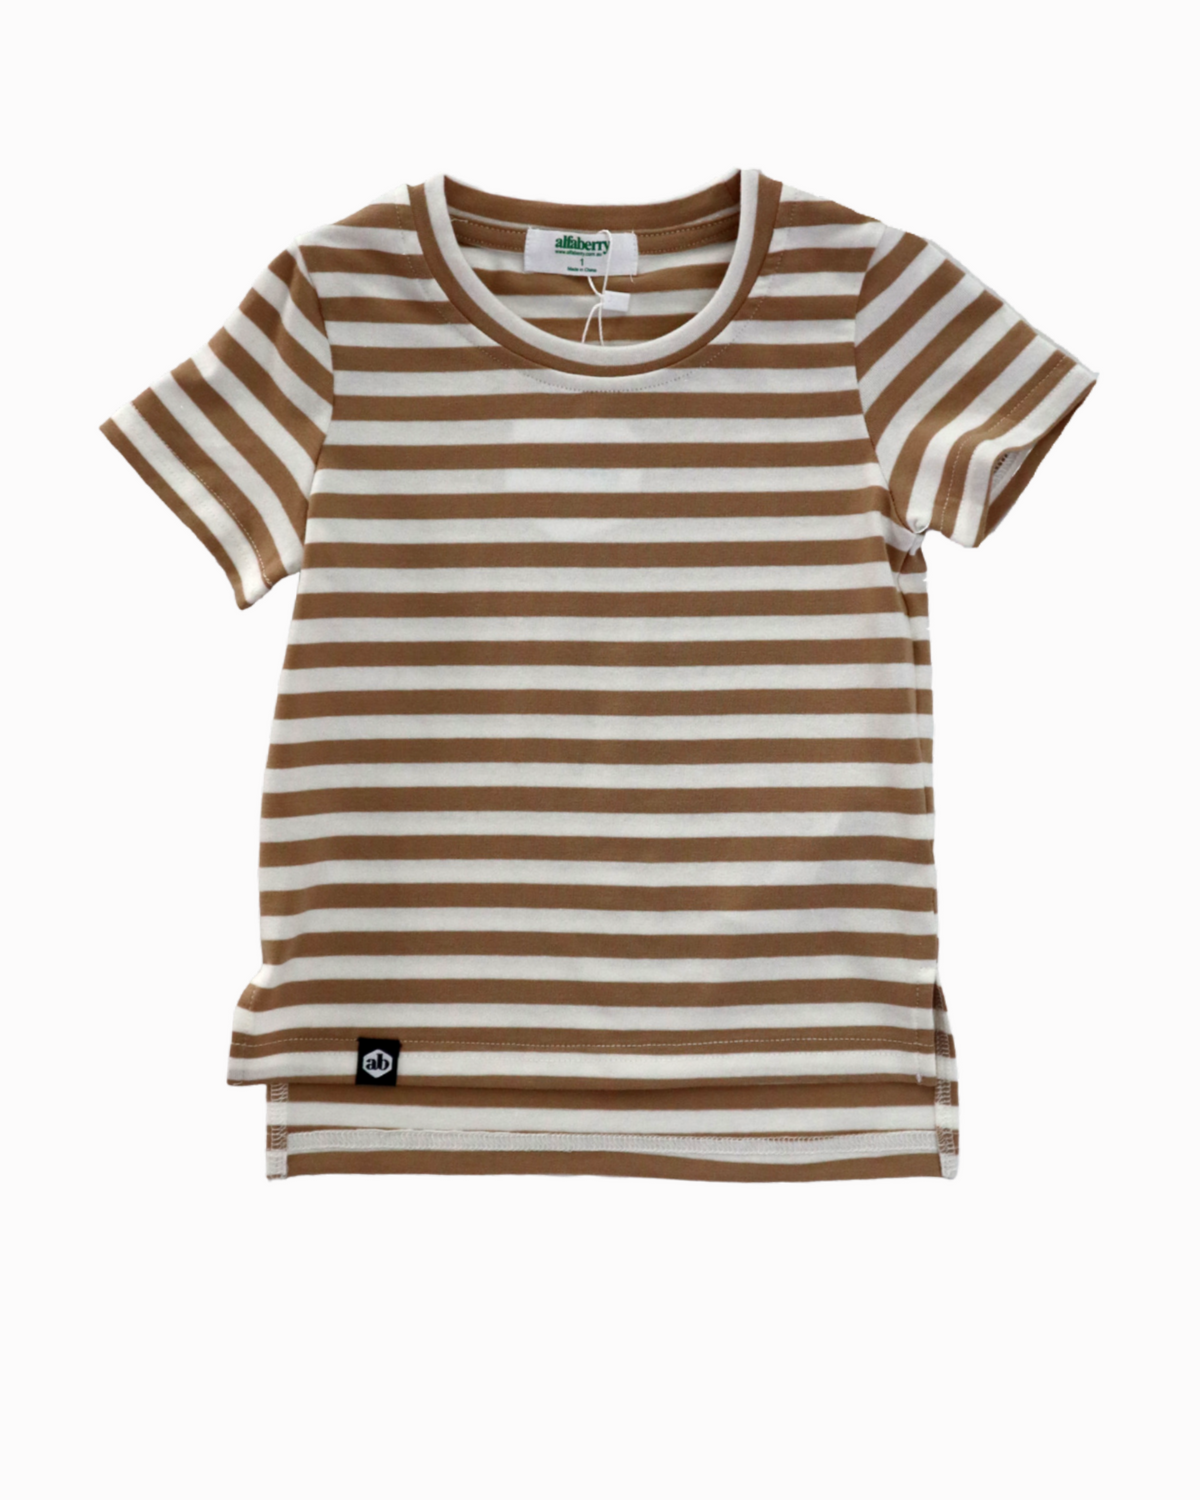 Buddy Tall Tee in Ivory and Almond Stripe